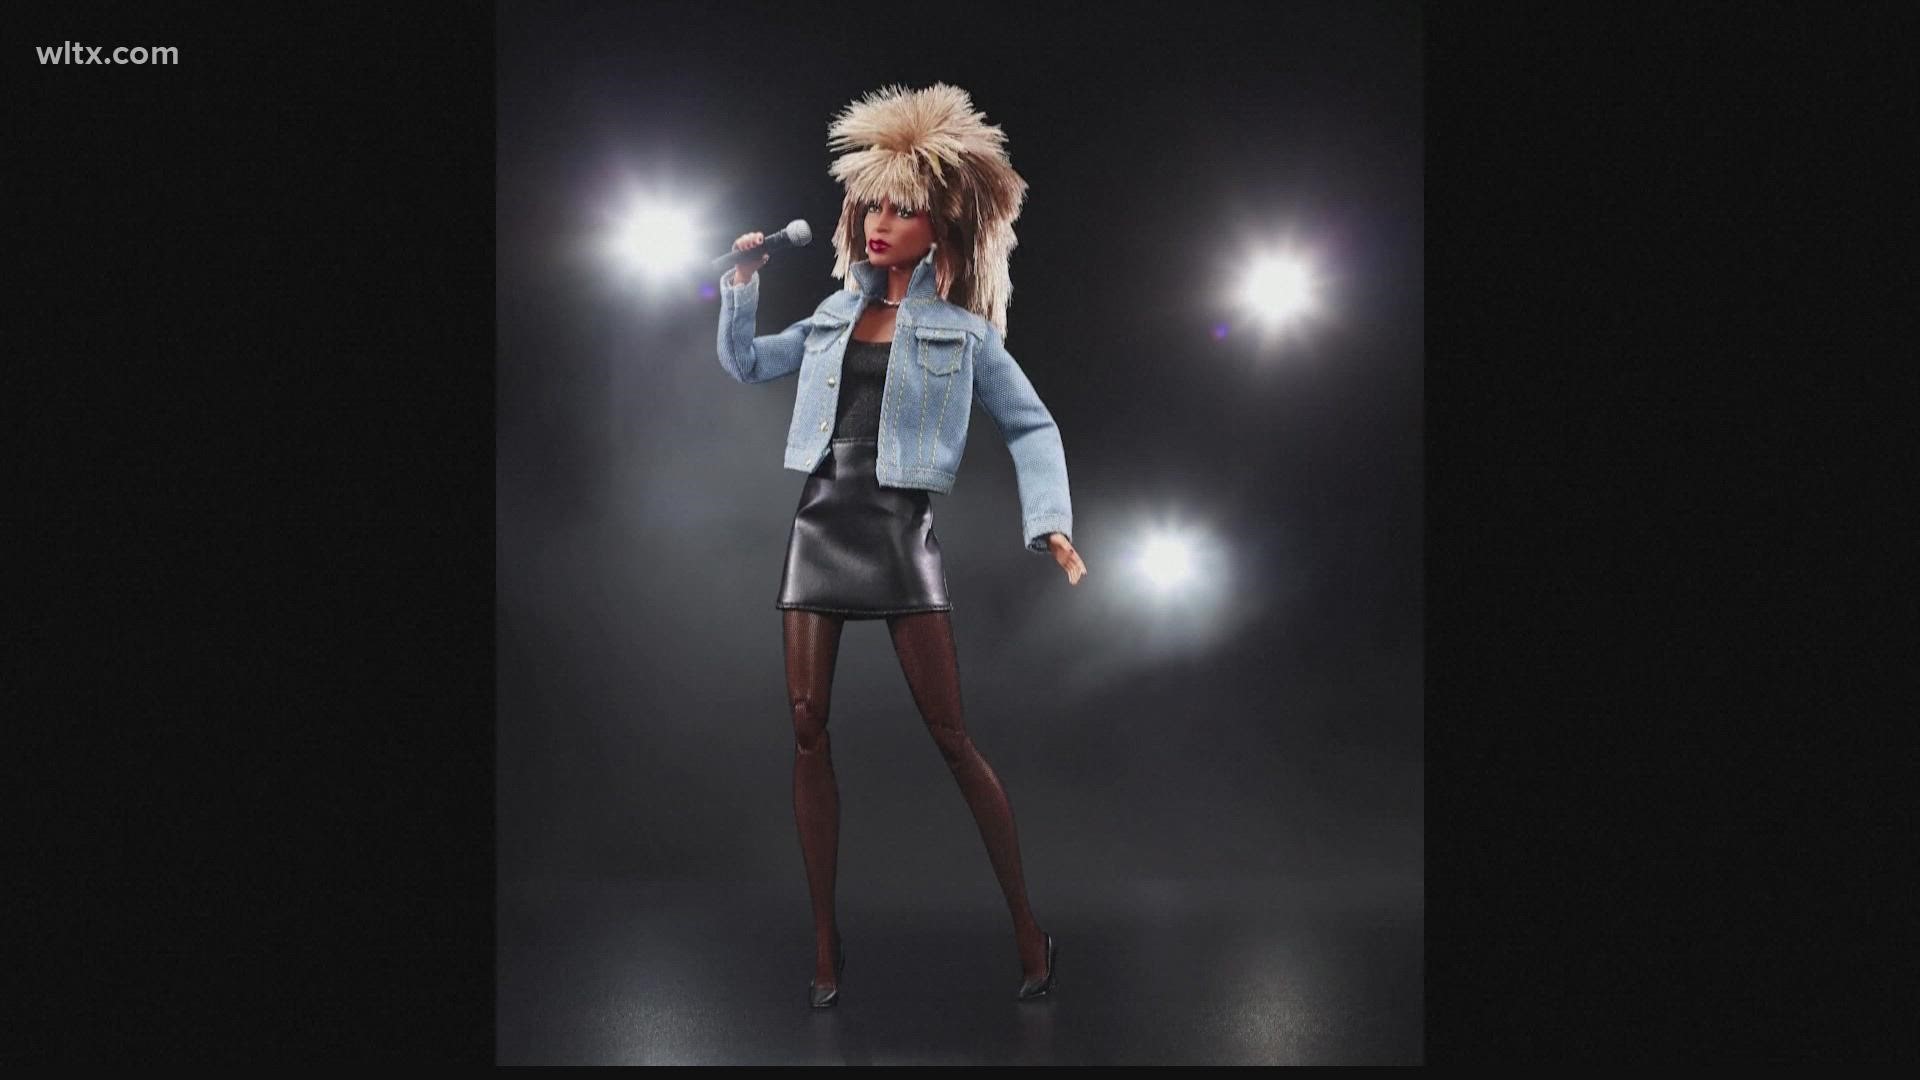 Toy company Mattel is celebrating the 40th anniversary of Tina Turner's hit song "What's love got to do with it" by creating her very own Barbie doll.